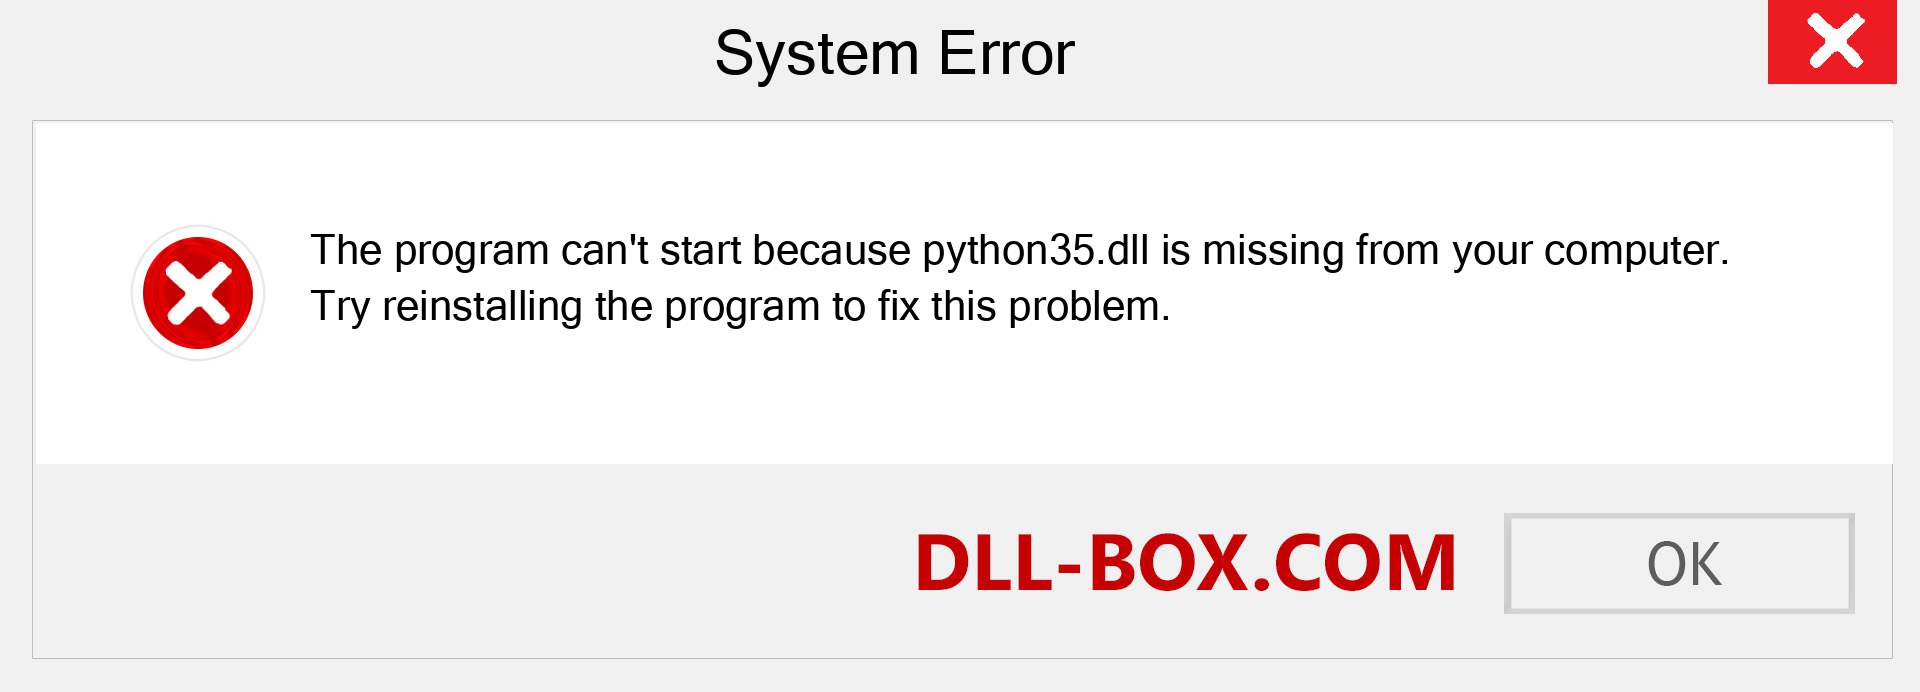  python35.dll file is missing?. Download for Windows 7, 8, 10 - Fix  python35 dll Missing Error on Windows, photos, images